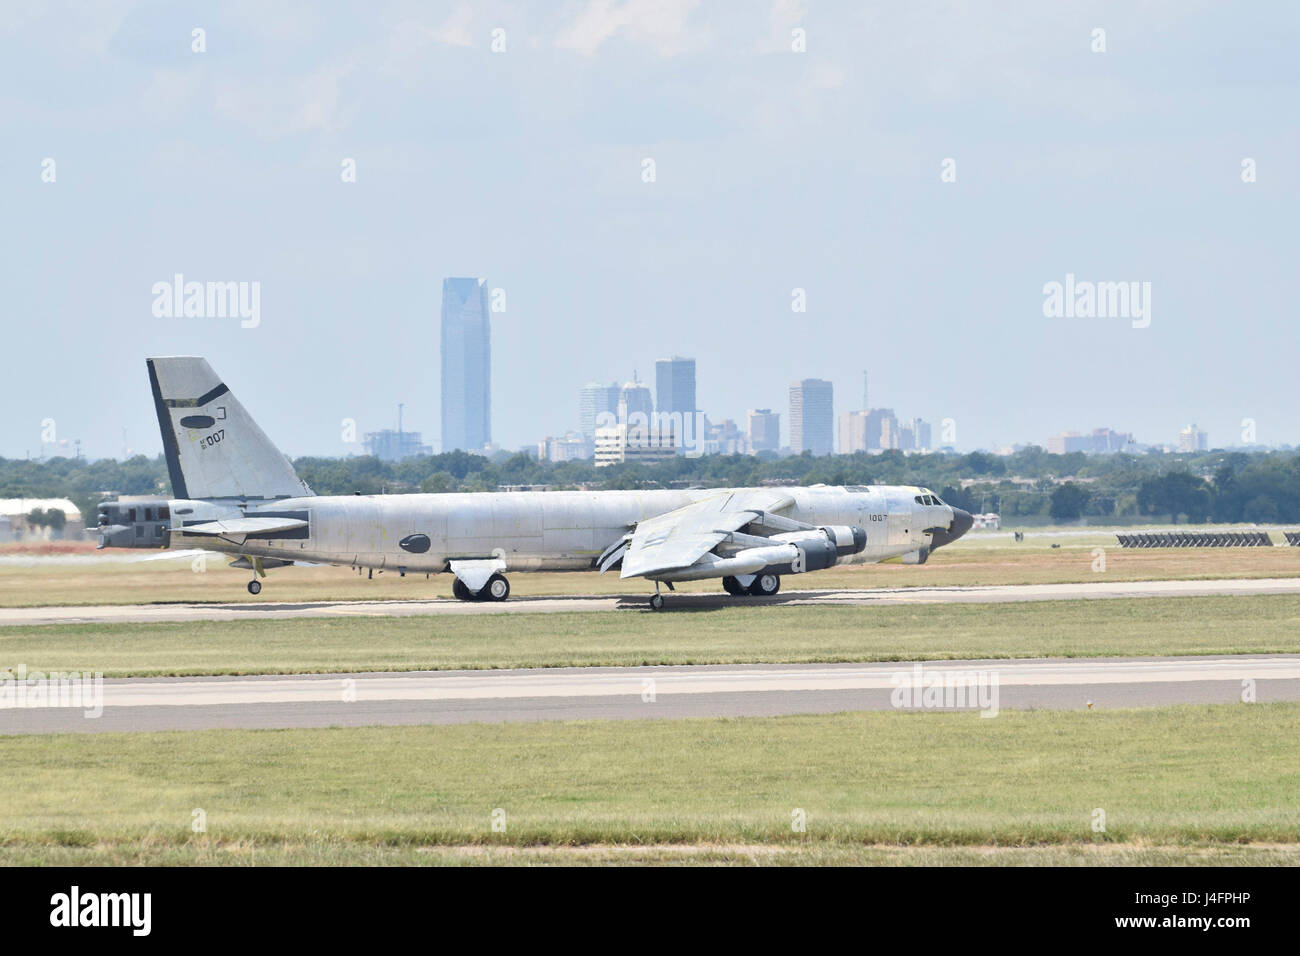 B-52H, 61-0007, 'Ghost Rider,' taxis with the skyline of Oklahoma City visible in the background before an attempted functional test flight after undergoing a 19-month overhaul and upgrade by the Oklahoma City Air Logistics Complex, Aug. 29, 2016, Tinker Air Force Base, Okla. 'Ghost Rider' is shown in natural metal since it has been overhauled and must be checked for full functionality before being painted. 61-0007 is the first B-52 to ever be regenerated from long-term storage with the 309th Aerospace Maintenance and Regeneration Group at Davis-Monthan AFB, Ariz., and returned to fully-operat Stock Photo